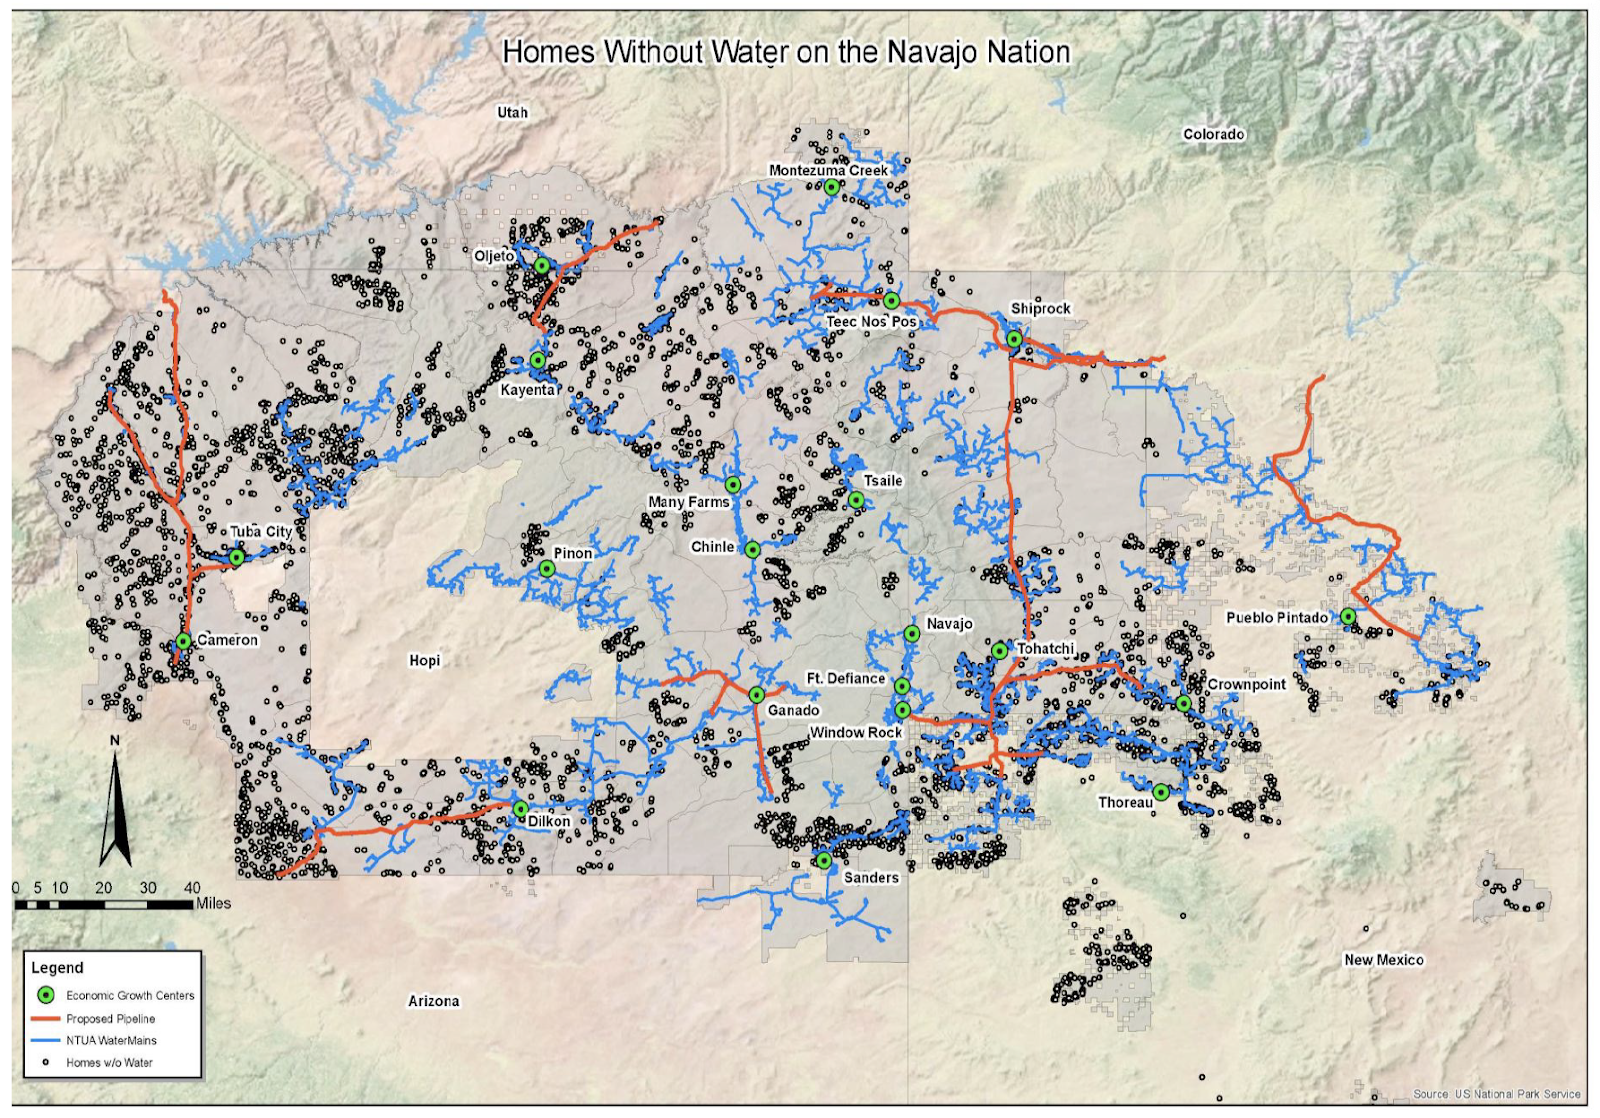 Houses without water and proposed water infrastructure on the Navajo Nation. From Navajo Tribal Utility Authority.